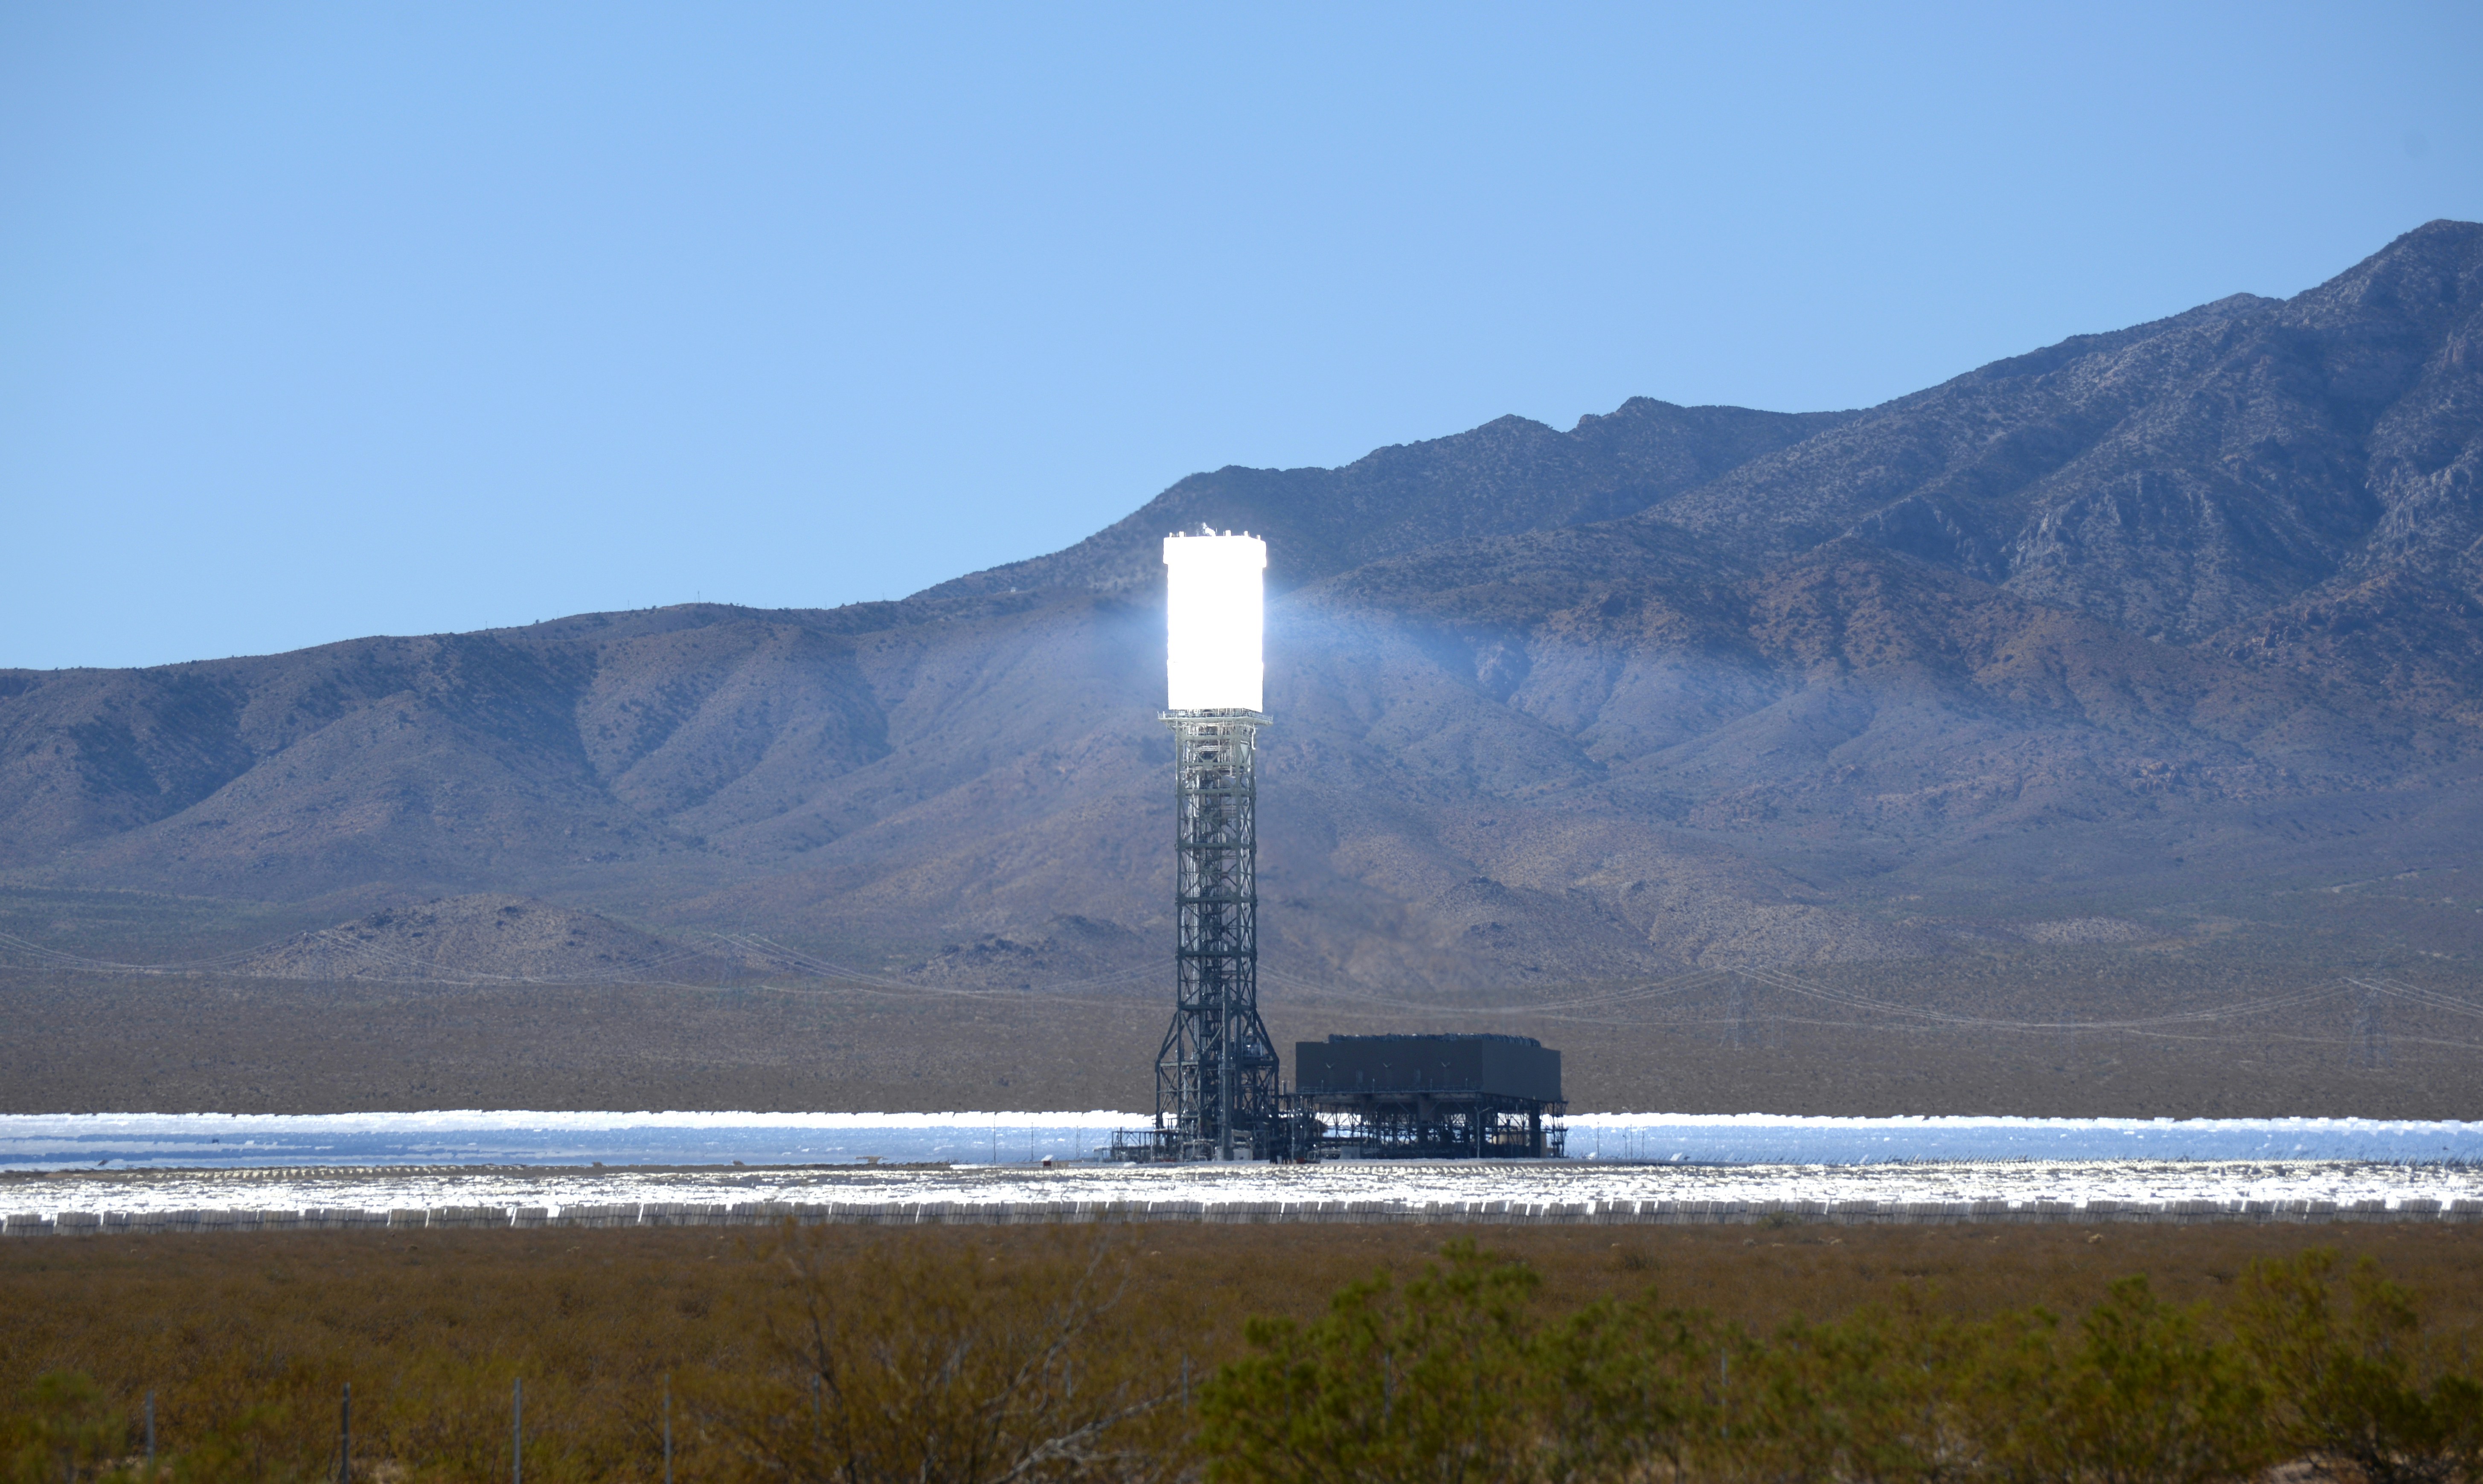 The Ivanpah Solar Power Facility is a concentrated solar thermal plant in the Mojave Desert near the California-Nevada border. Acres of heliostat mirrors direct sunlight onto receivers located in the 3 centralized solar towers. The receivers generate steam to drive turbines and generate power. When it opened in 2014, Ivanpah was the world's largest solar thermal power station. Last year (2019) it produced 772,214 MWh of electricity.